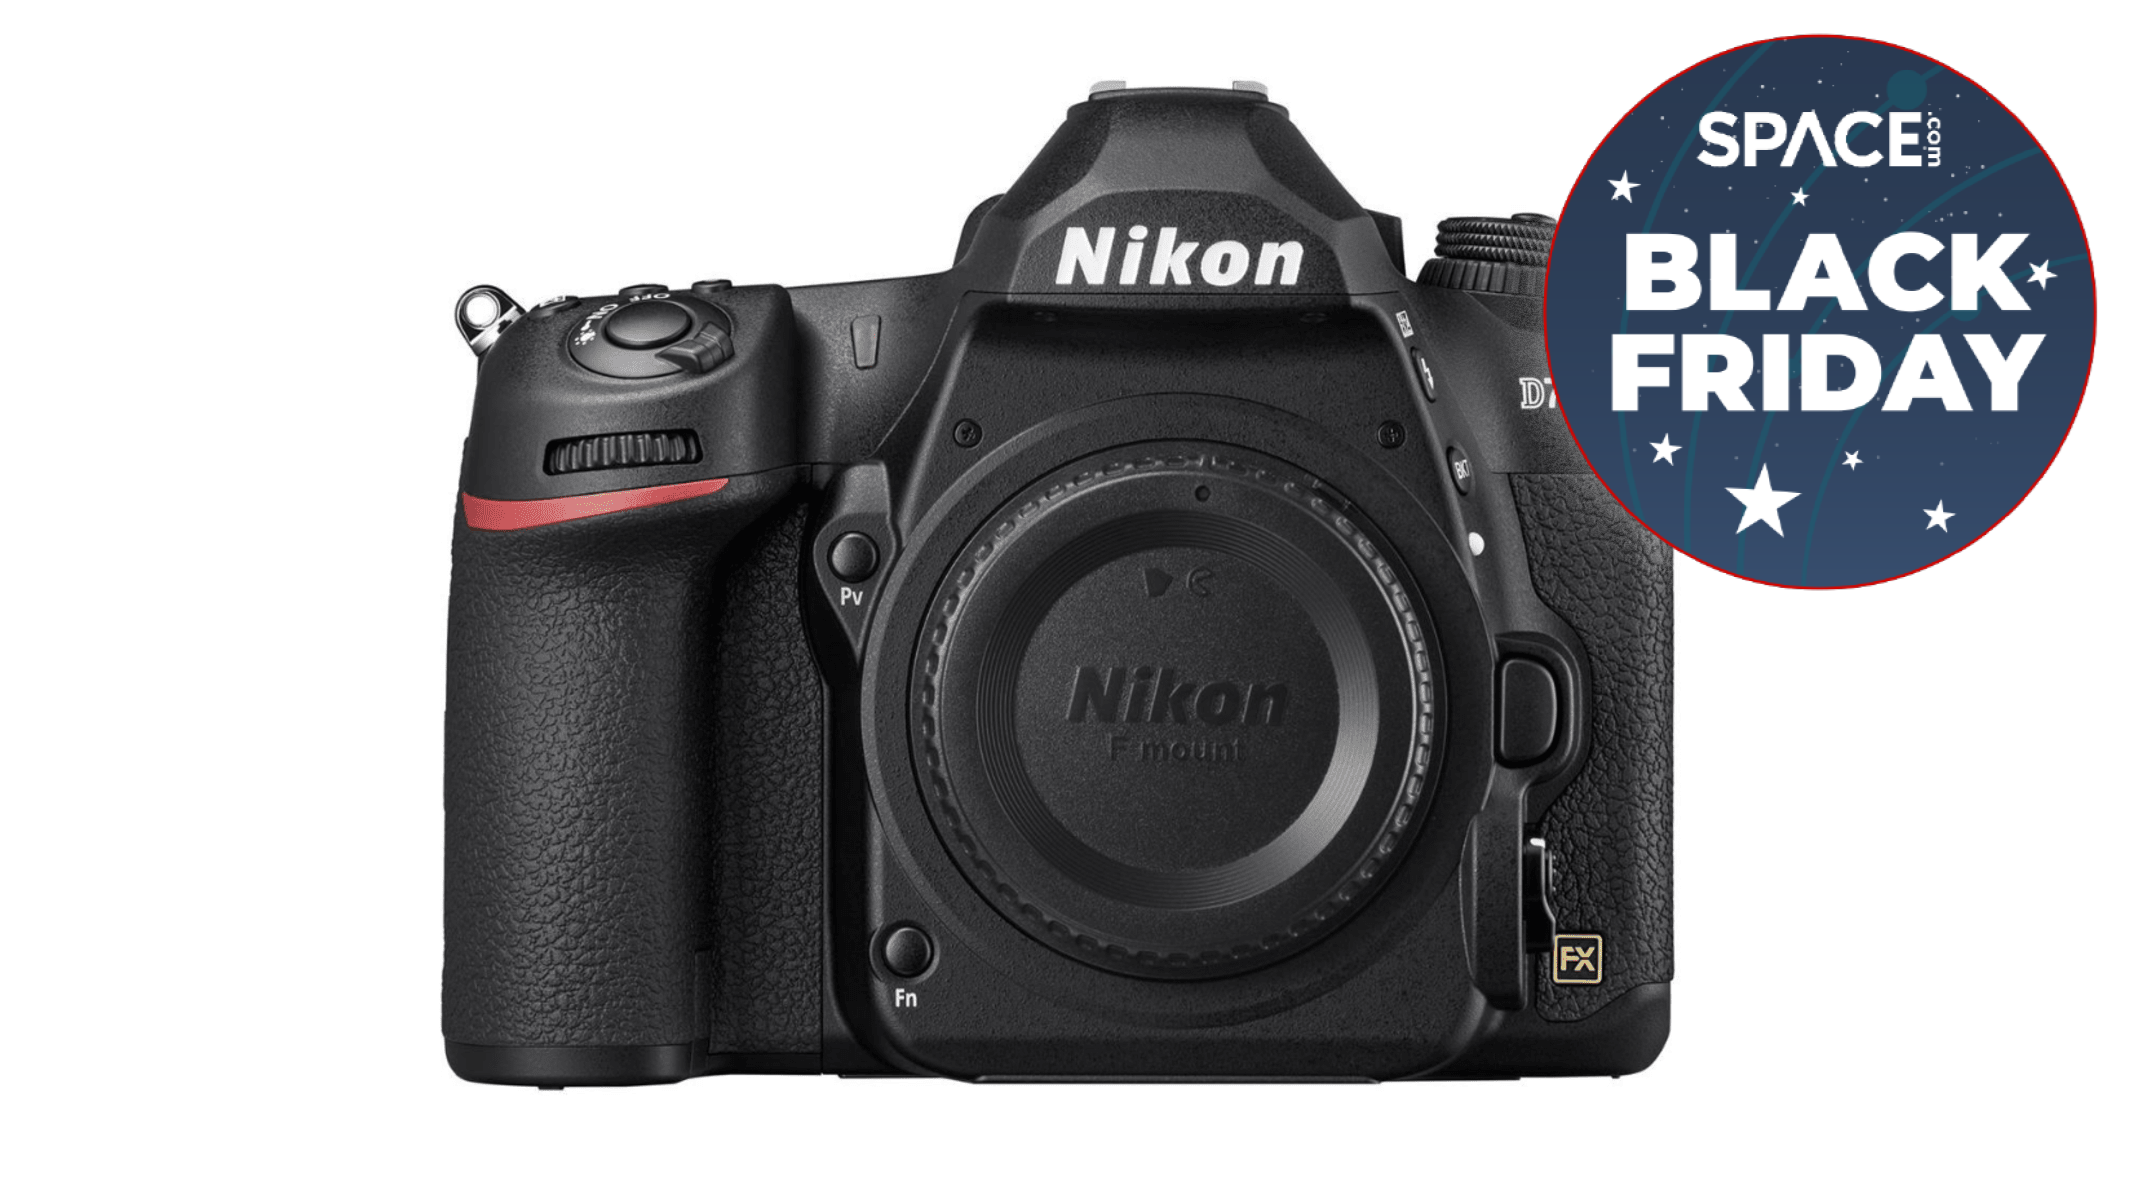 Take $400 off the Nikon D780 this Cyber Monday Space